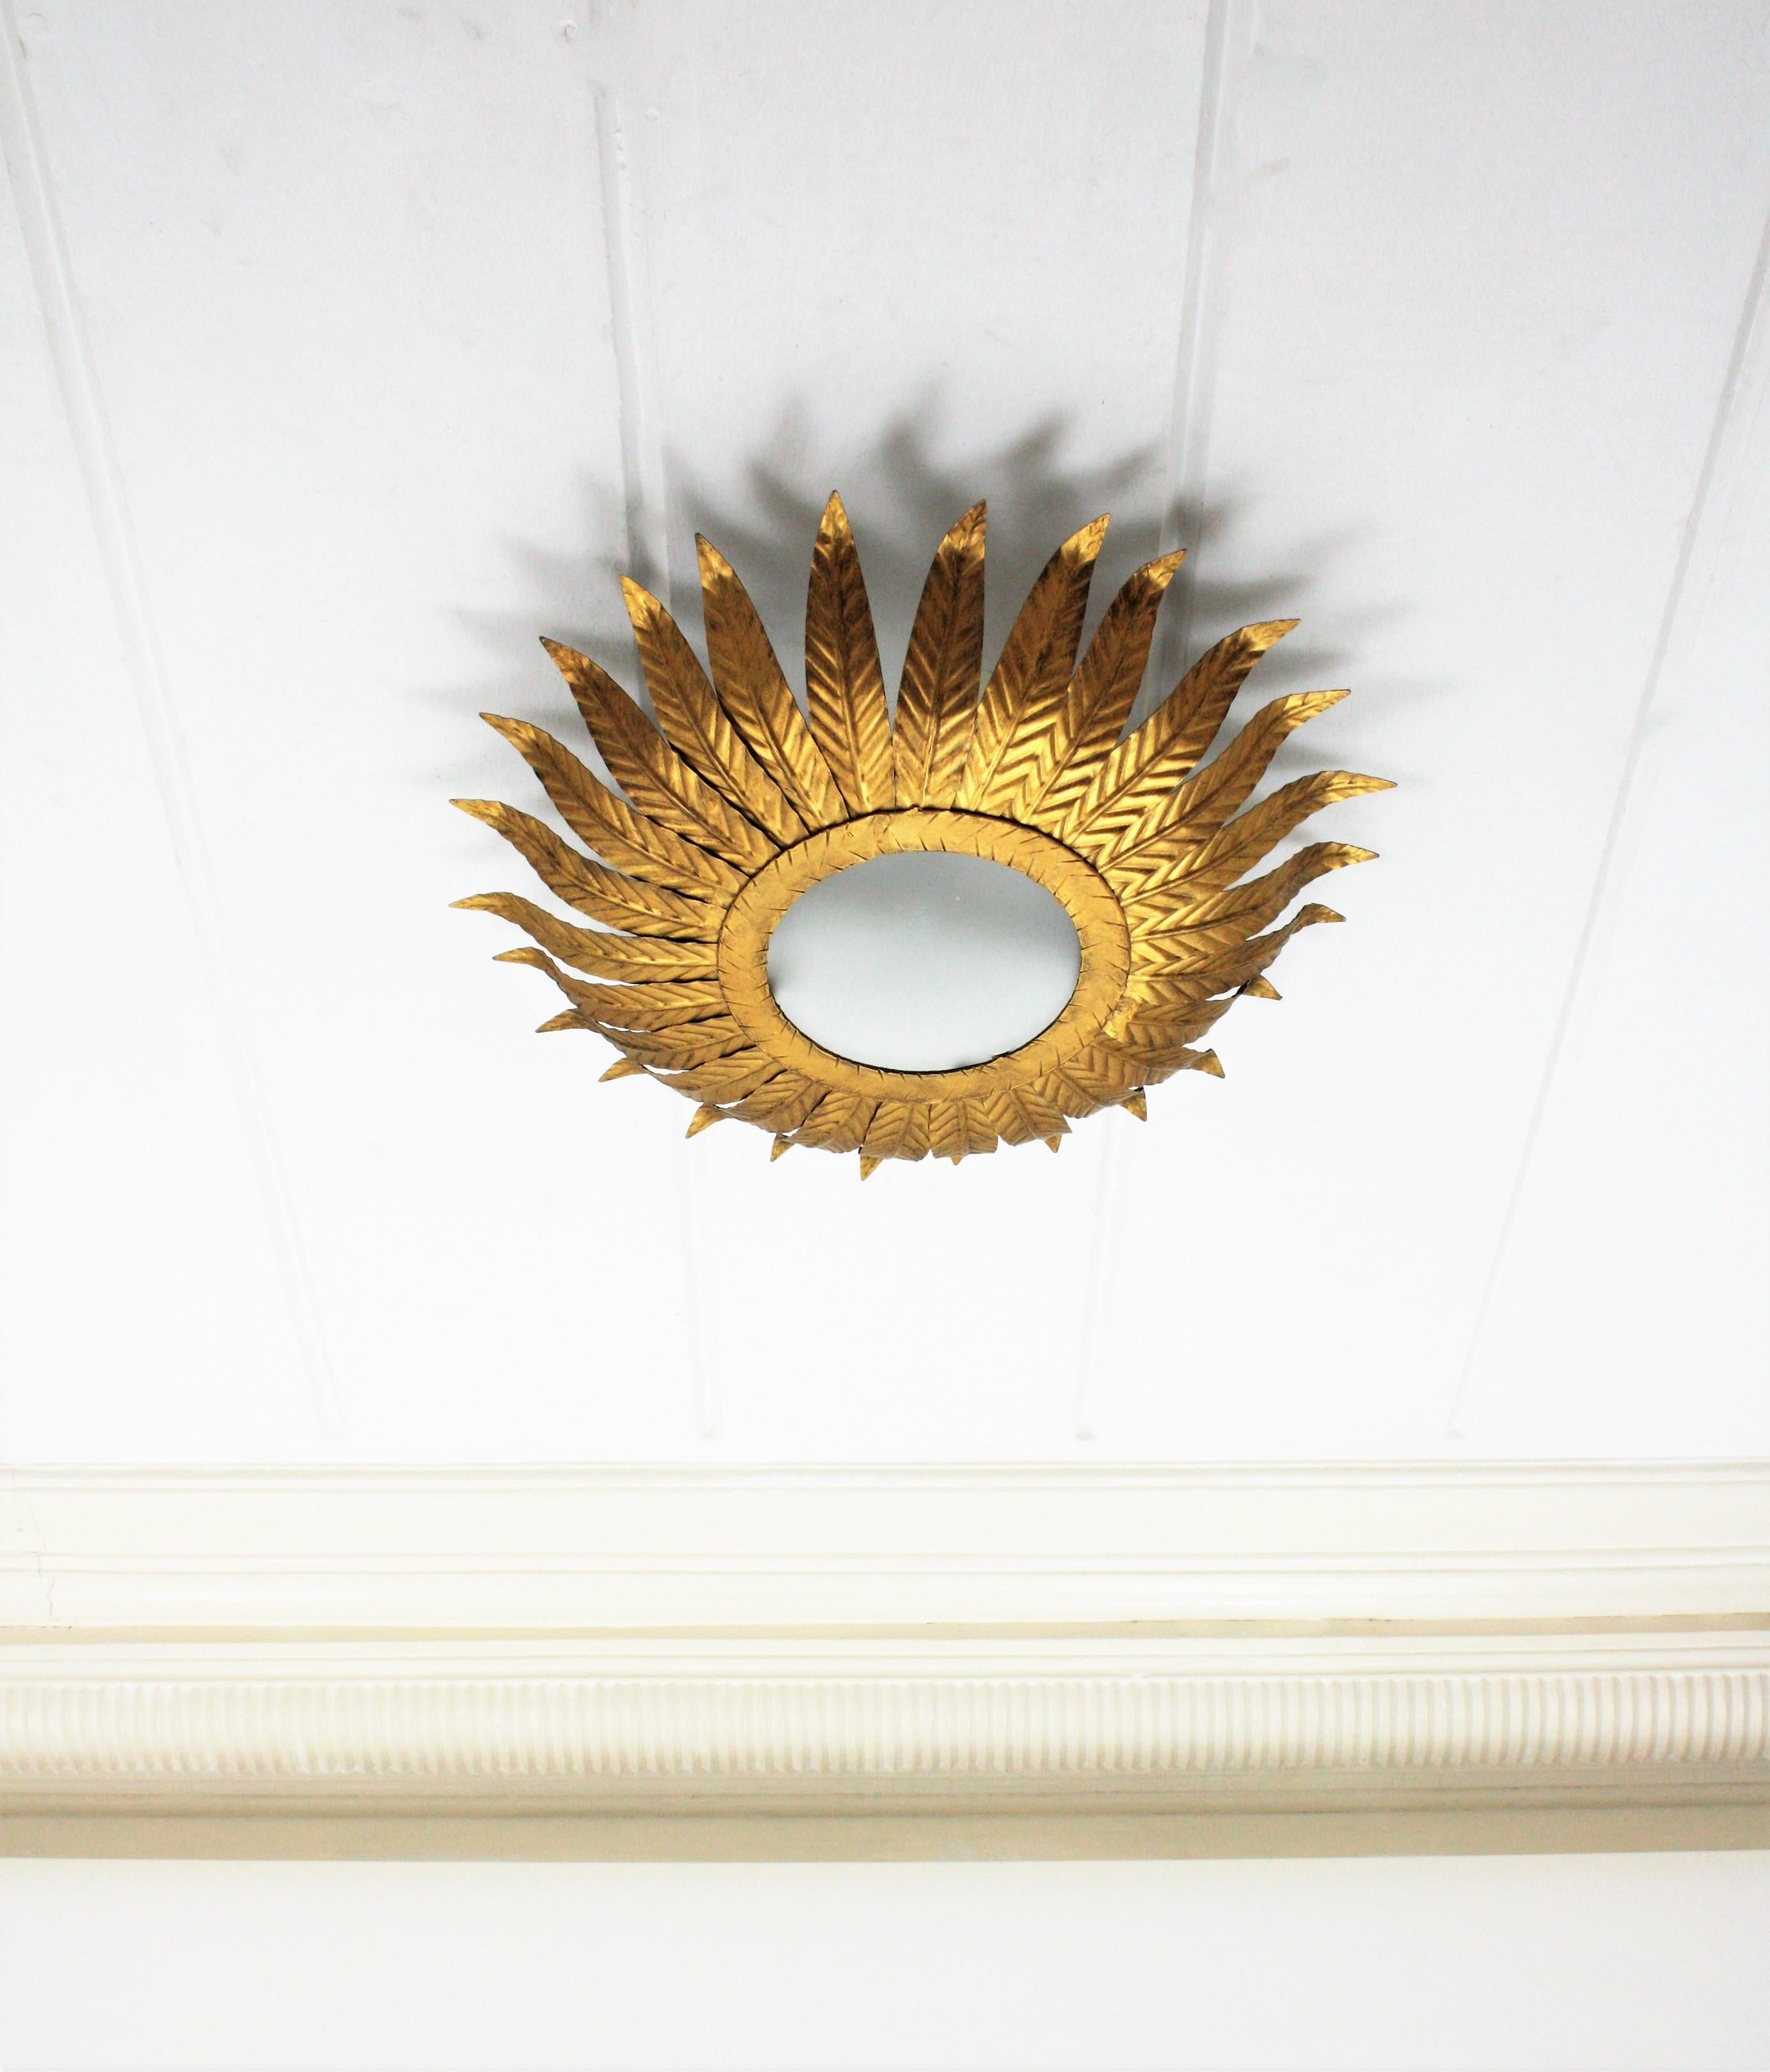 Gilt metal sunburst leafed flushmount or sunburst mirror, Spain, 1960s.
This beautiful ceiling light fixture features a flower burst / sunburst comprised by leaves surrounding a central frosted glass difusser. It can be used as flushmount or as a